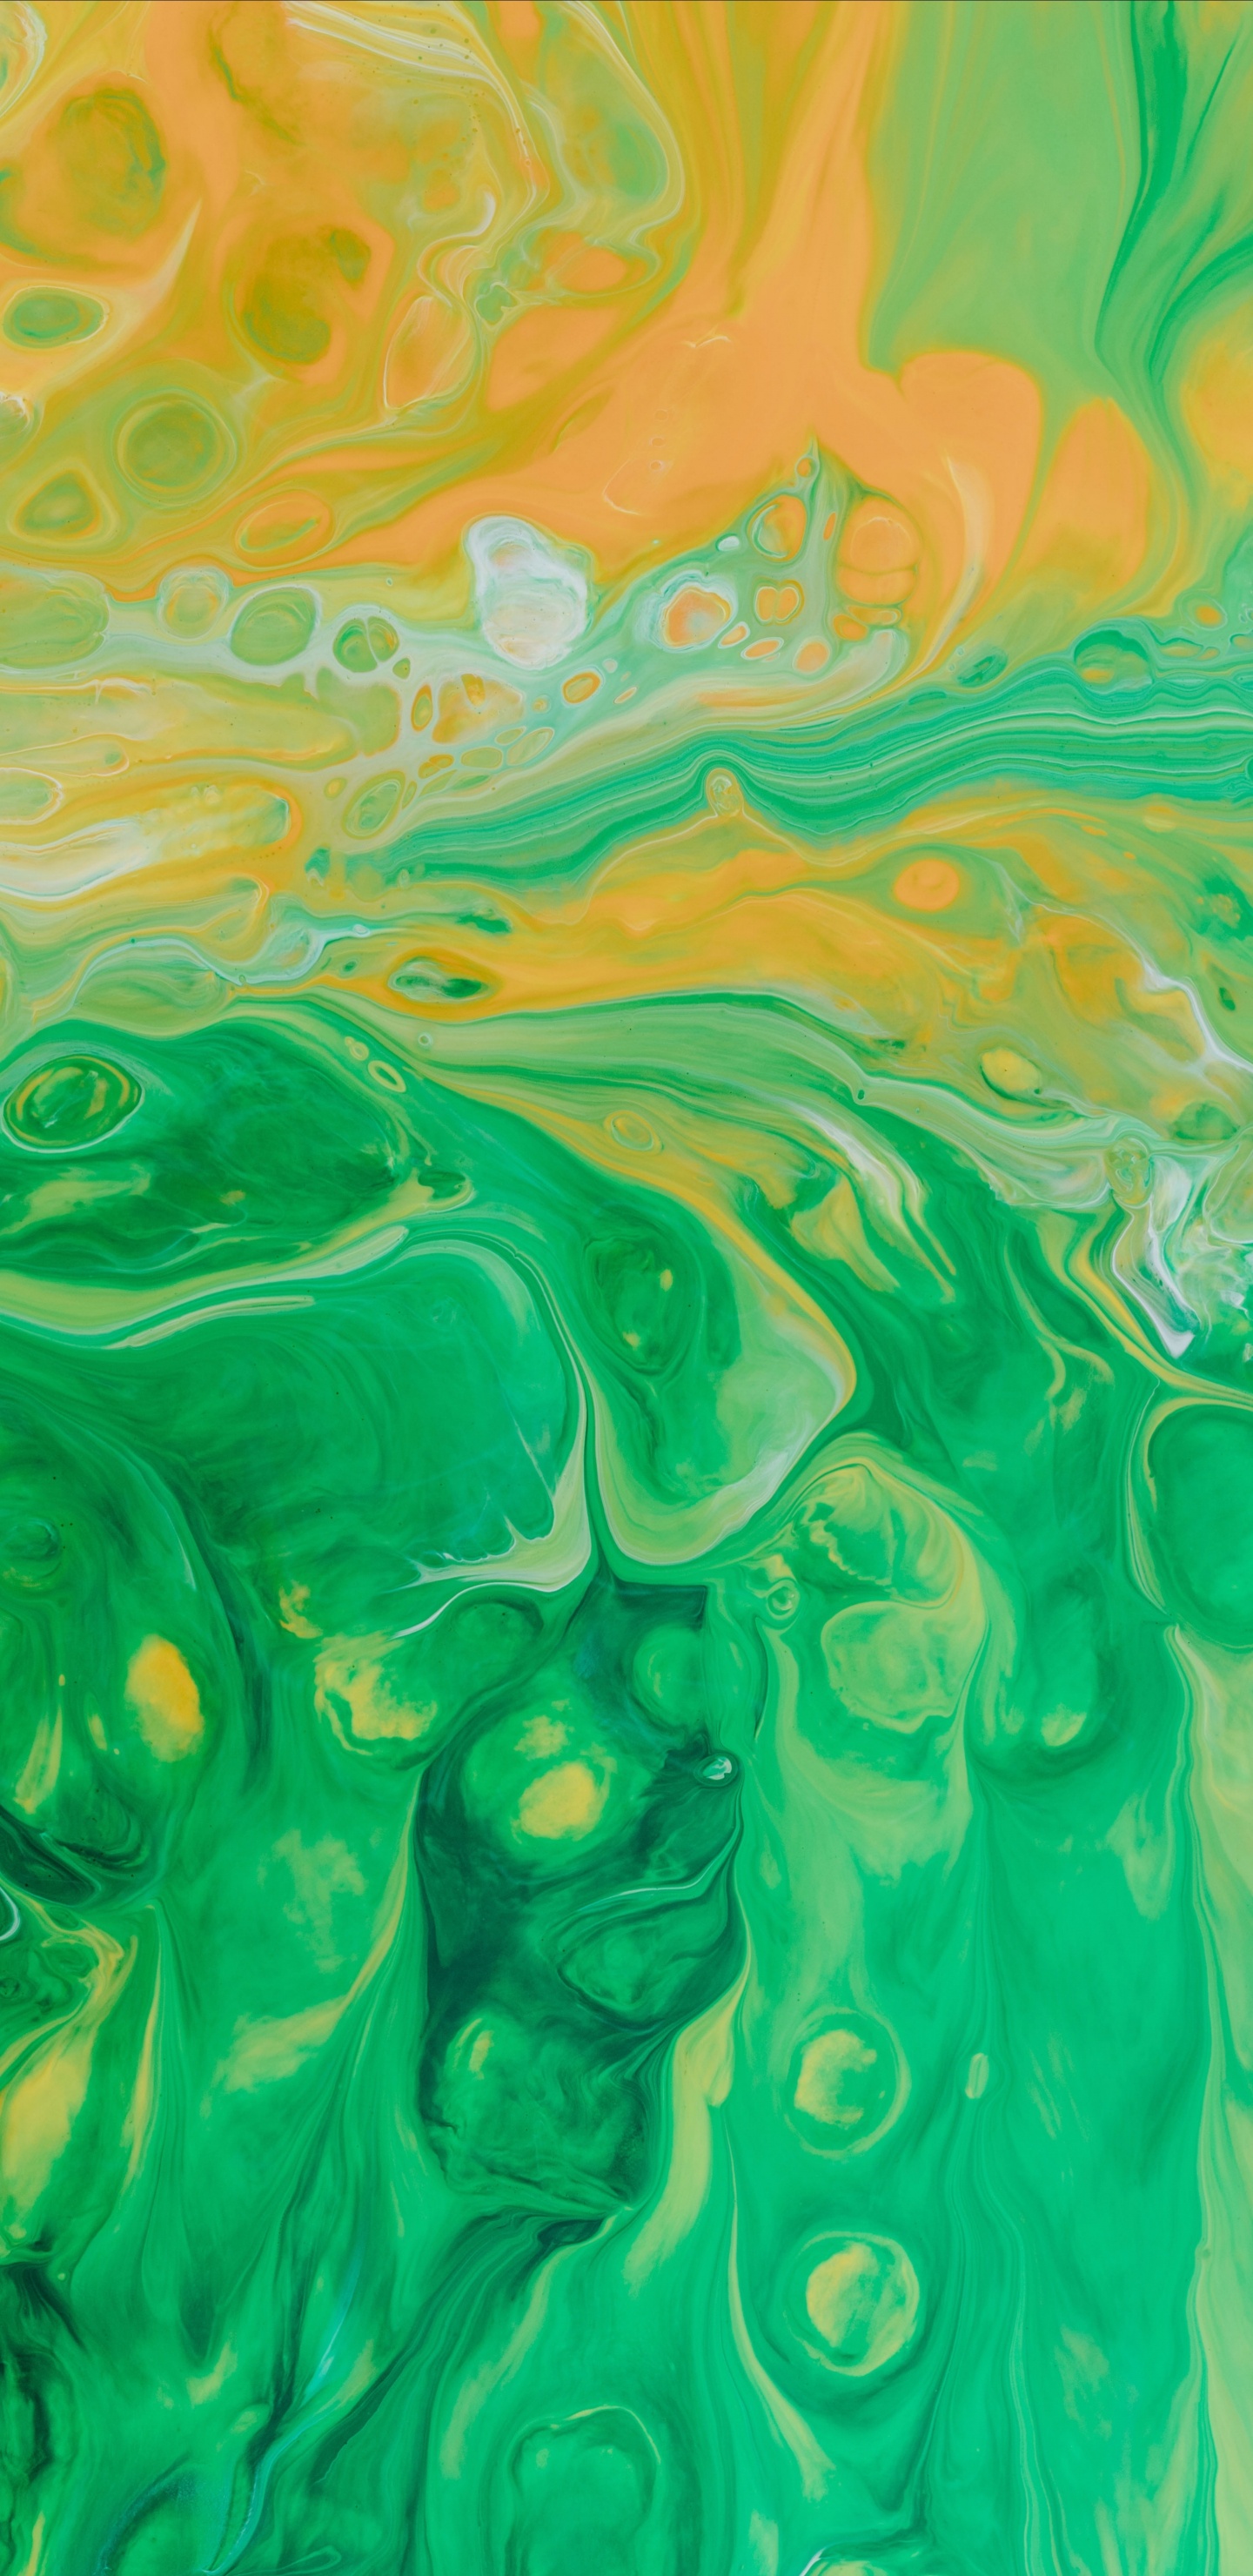 Green and Yellow Abstract Painting. Wallpaper in 1440x2960 Resolution